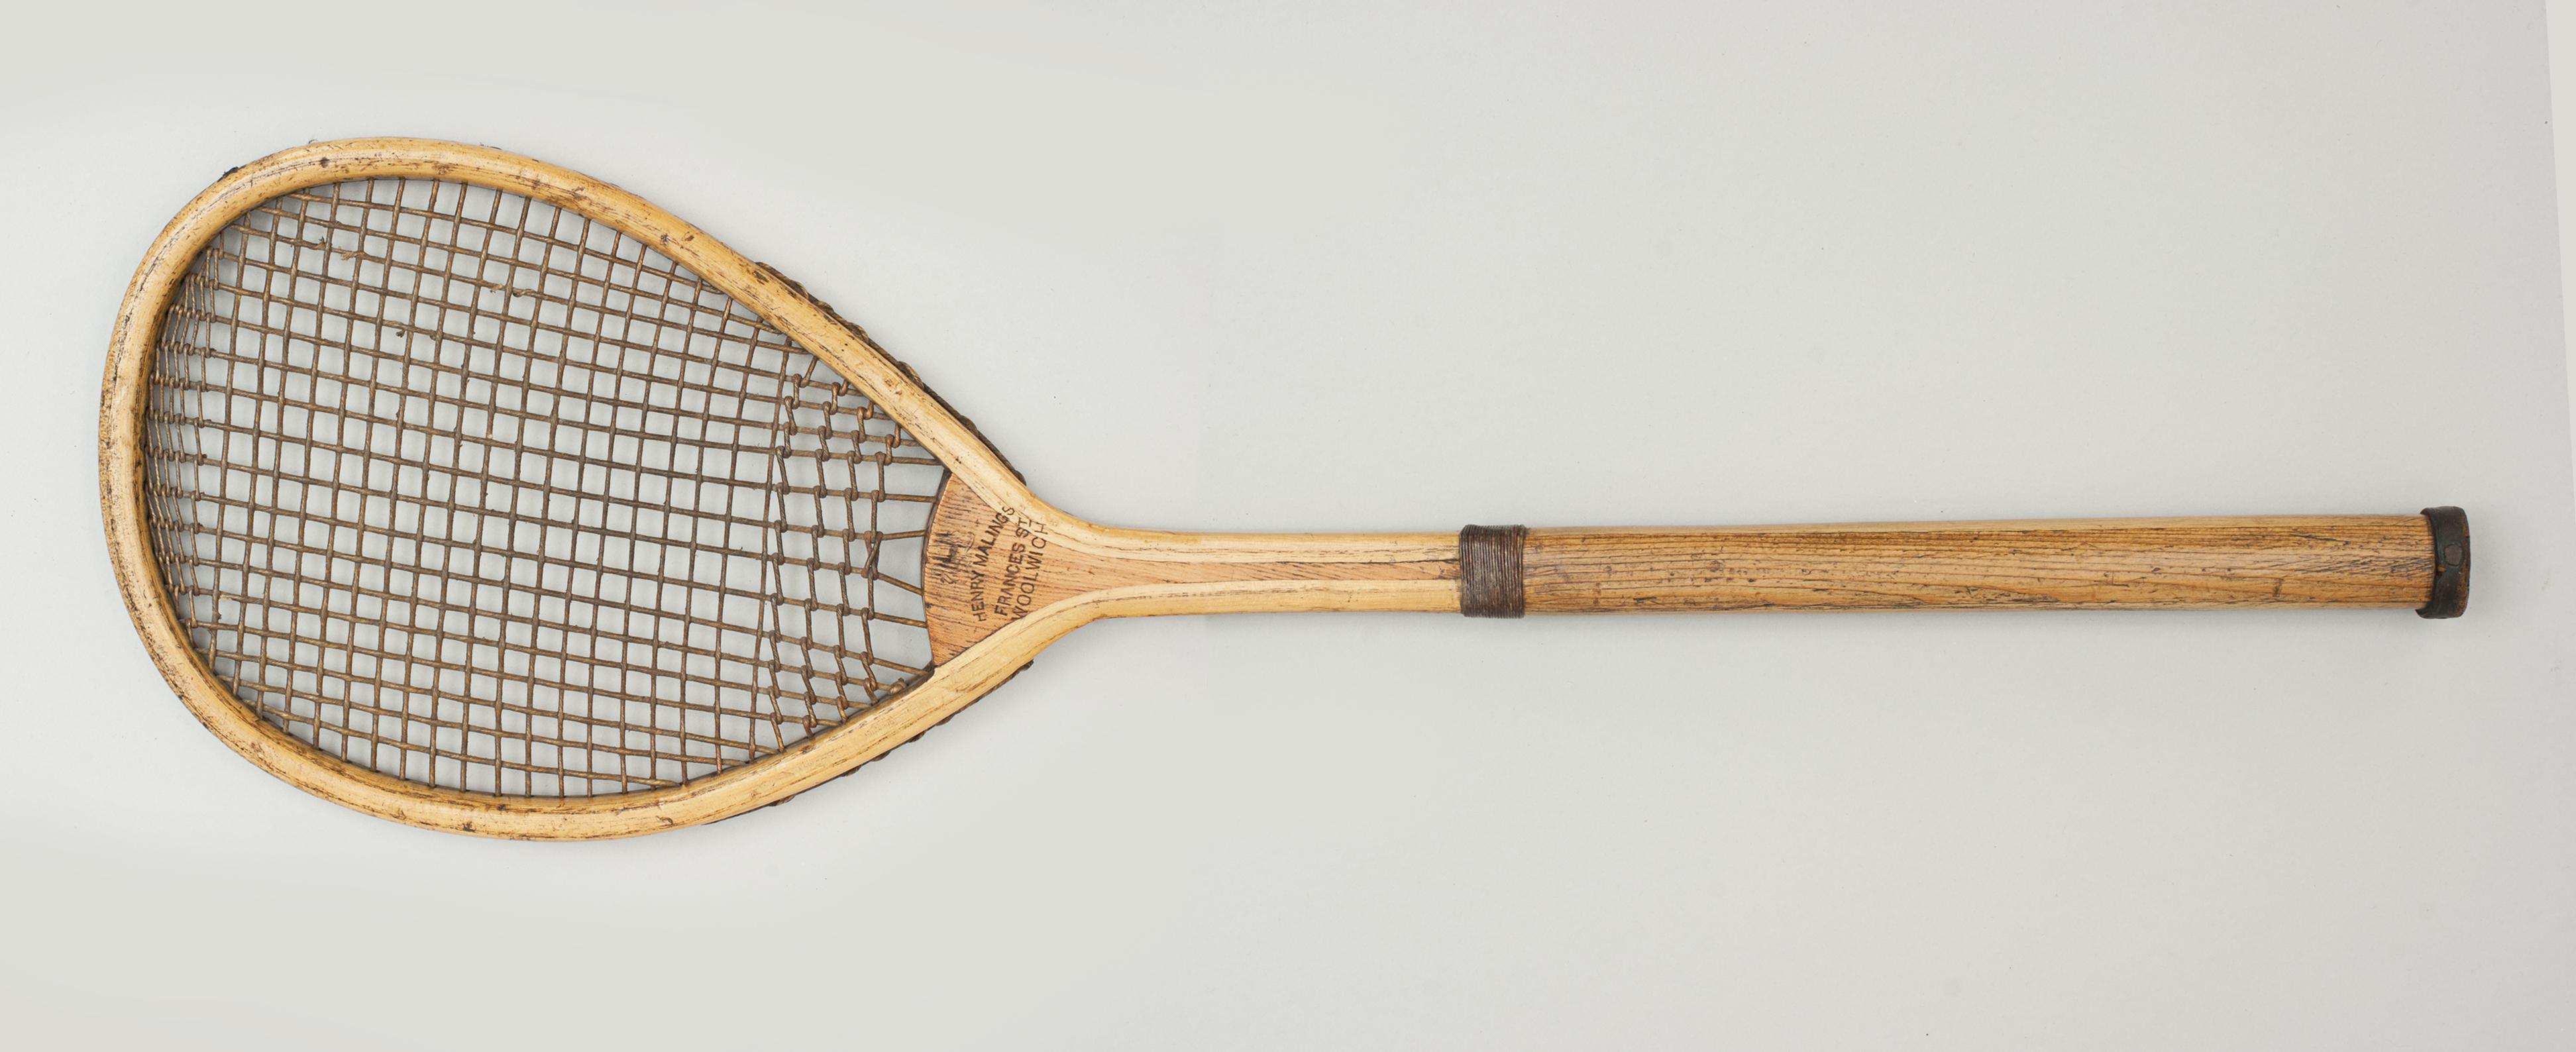 A rare, early lopsided (tilt head) lawn tennis racquet in excellent original condition. The ash frame is in very good condition with concave wedge stamped with maker's mark and the Royal Coat of Arms. The period thick gut stringing is in good